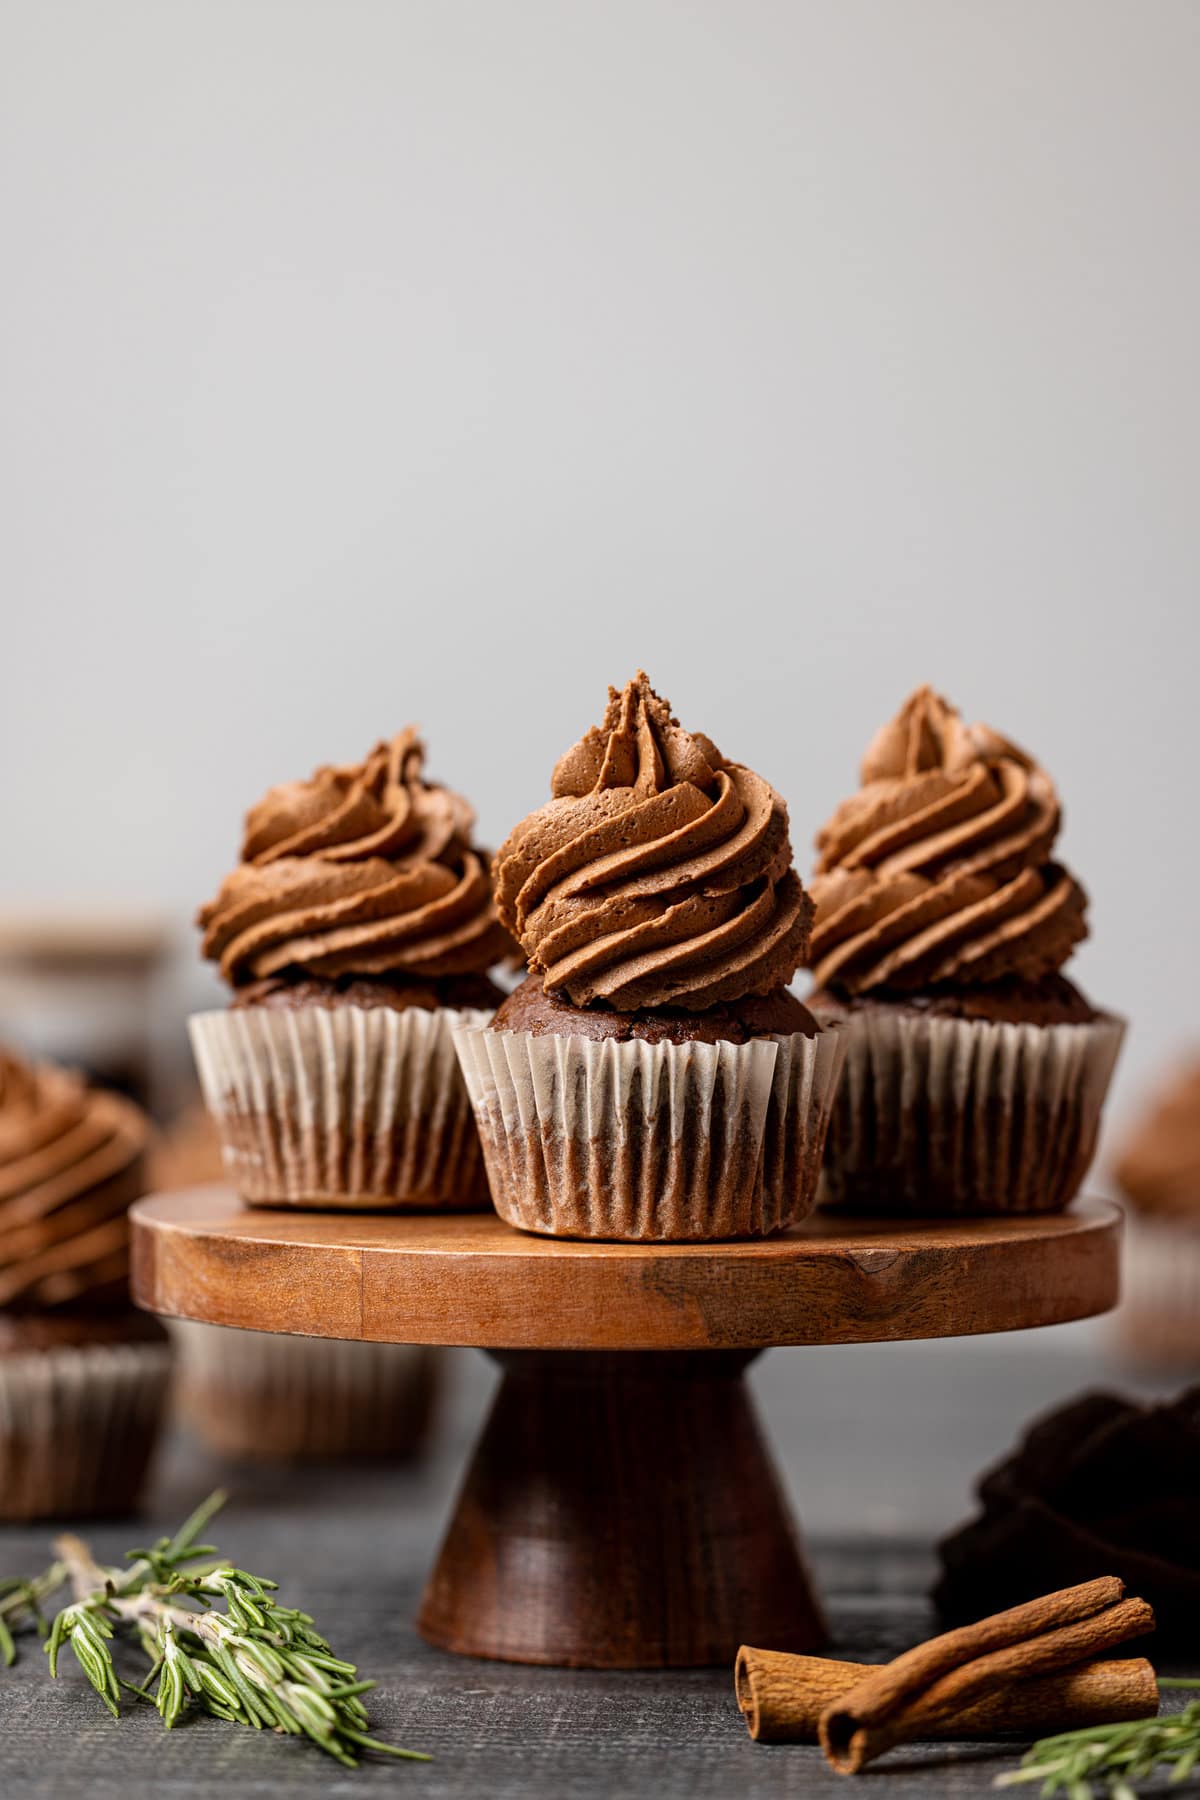 Wooden serving platter of Chocolate Sweet Potato Cupcakes